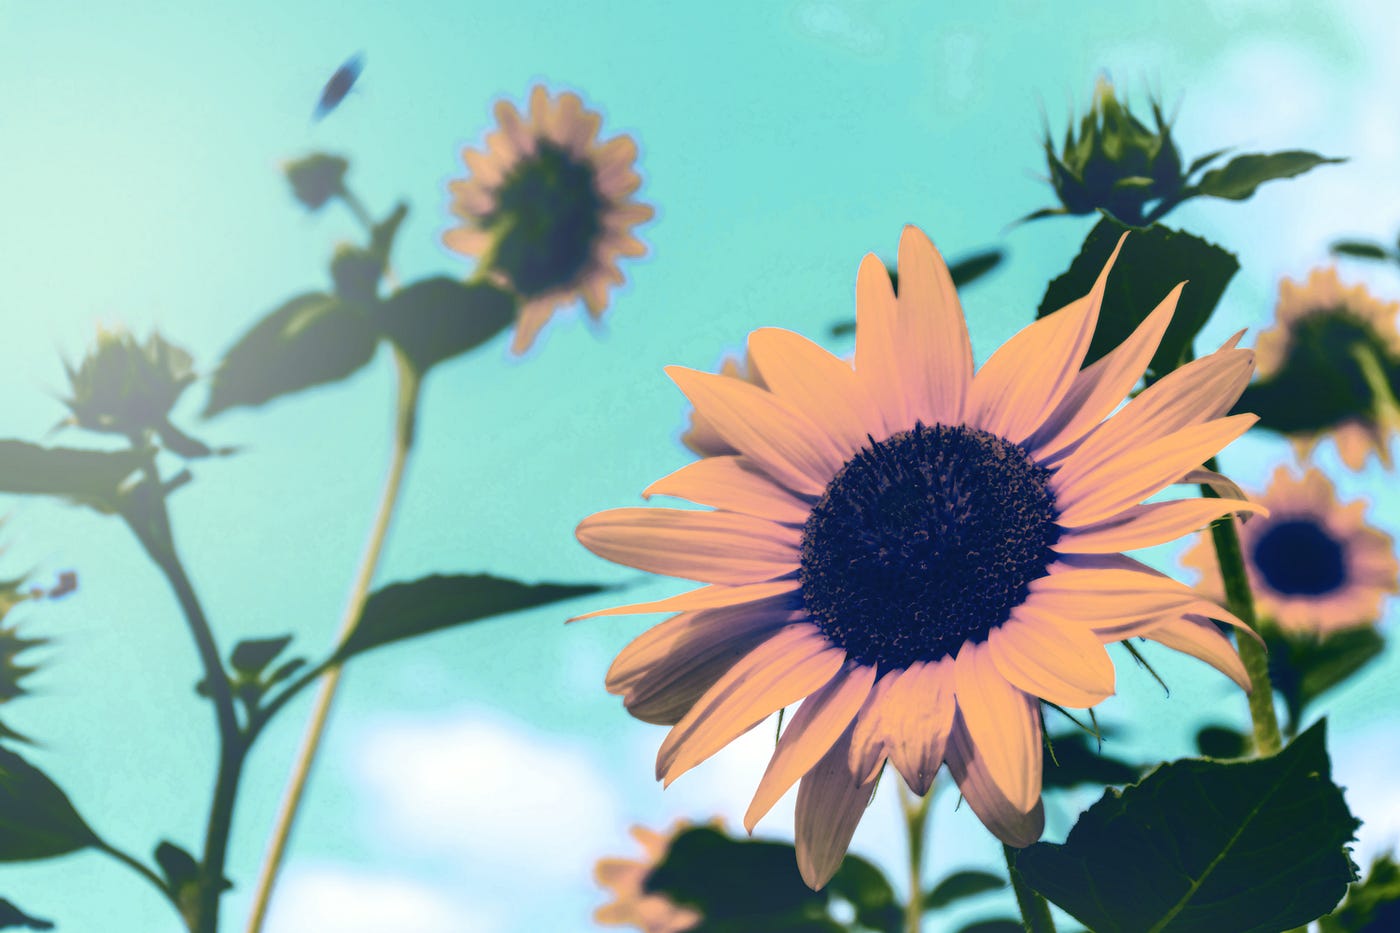 Image of sunflowers and a light blue sky.